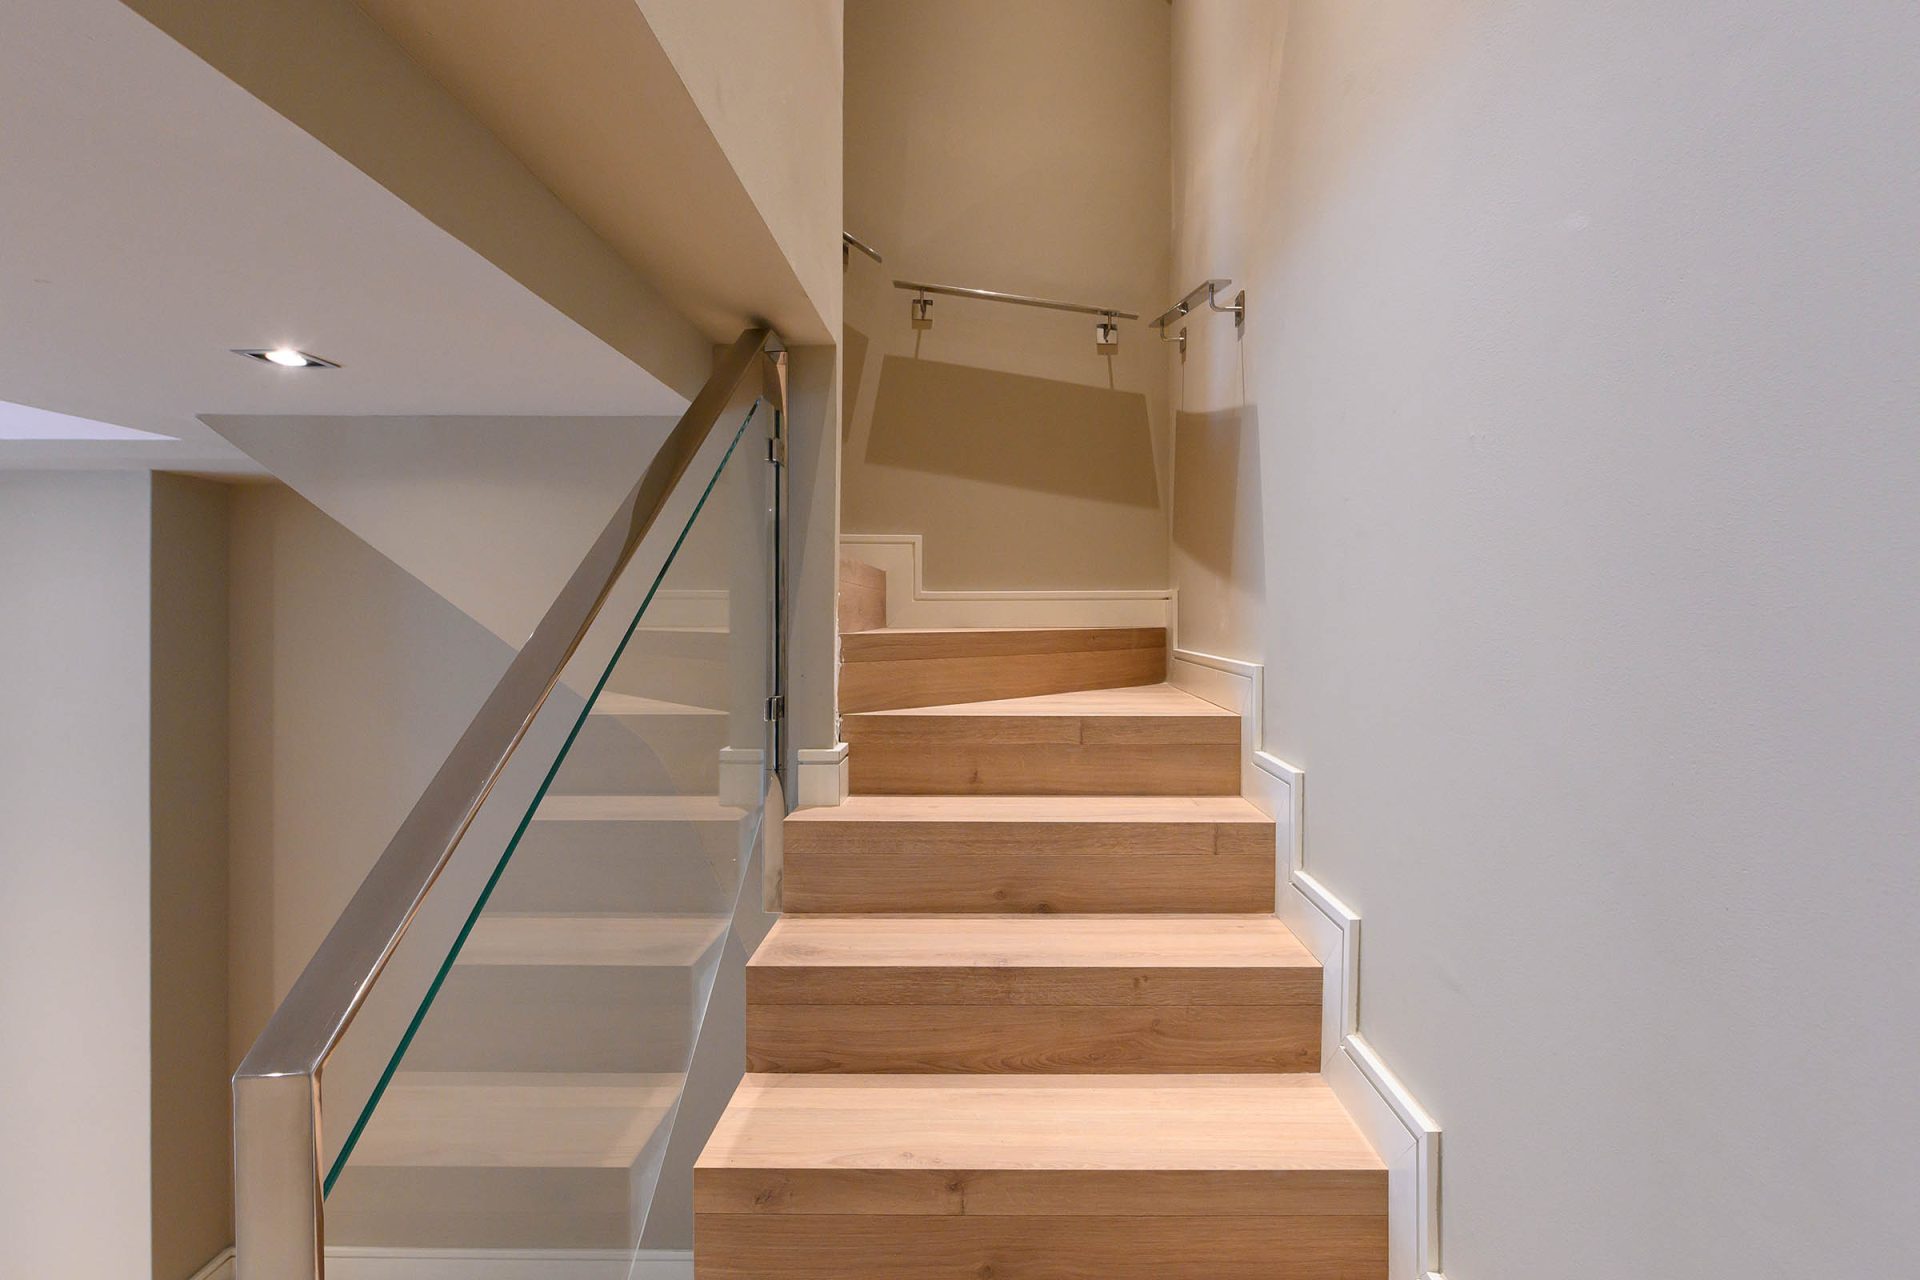 Wooden stairs with metal railings